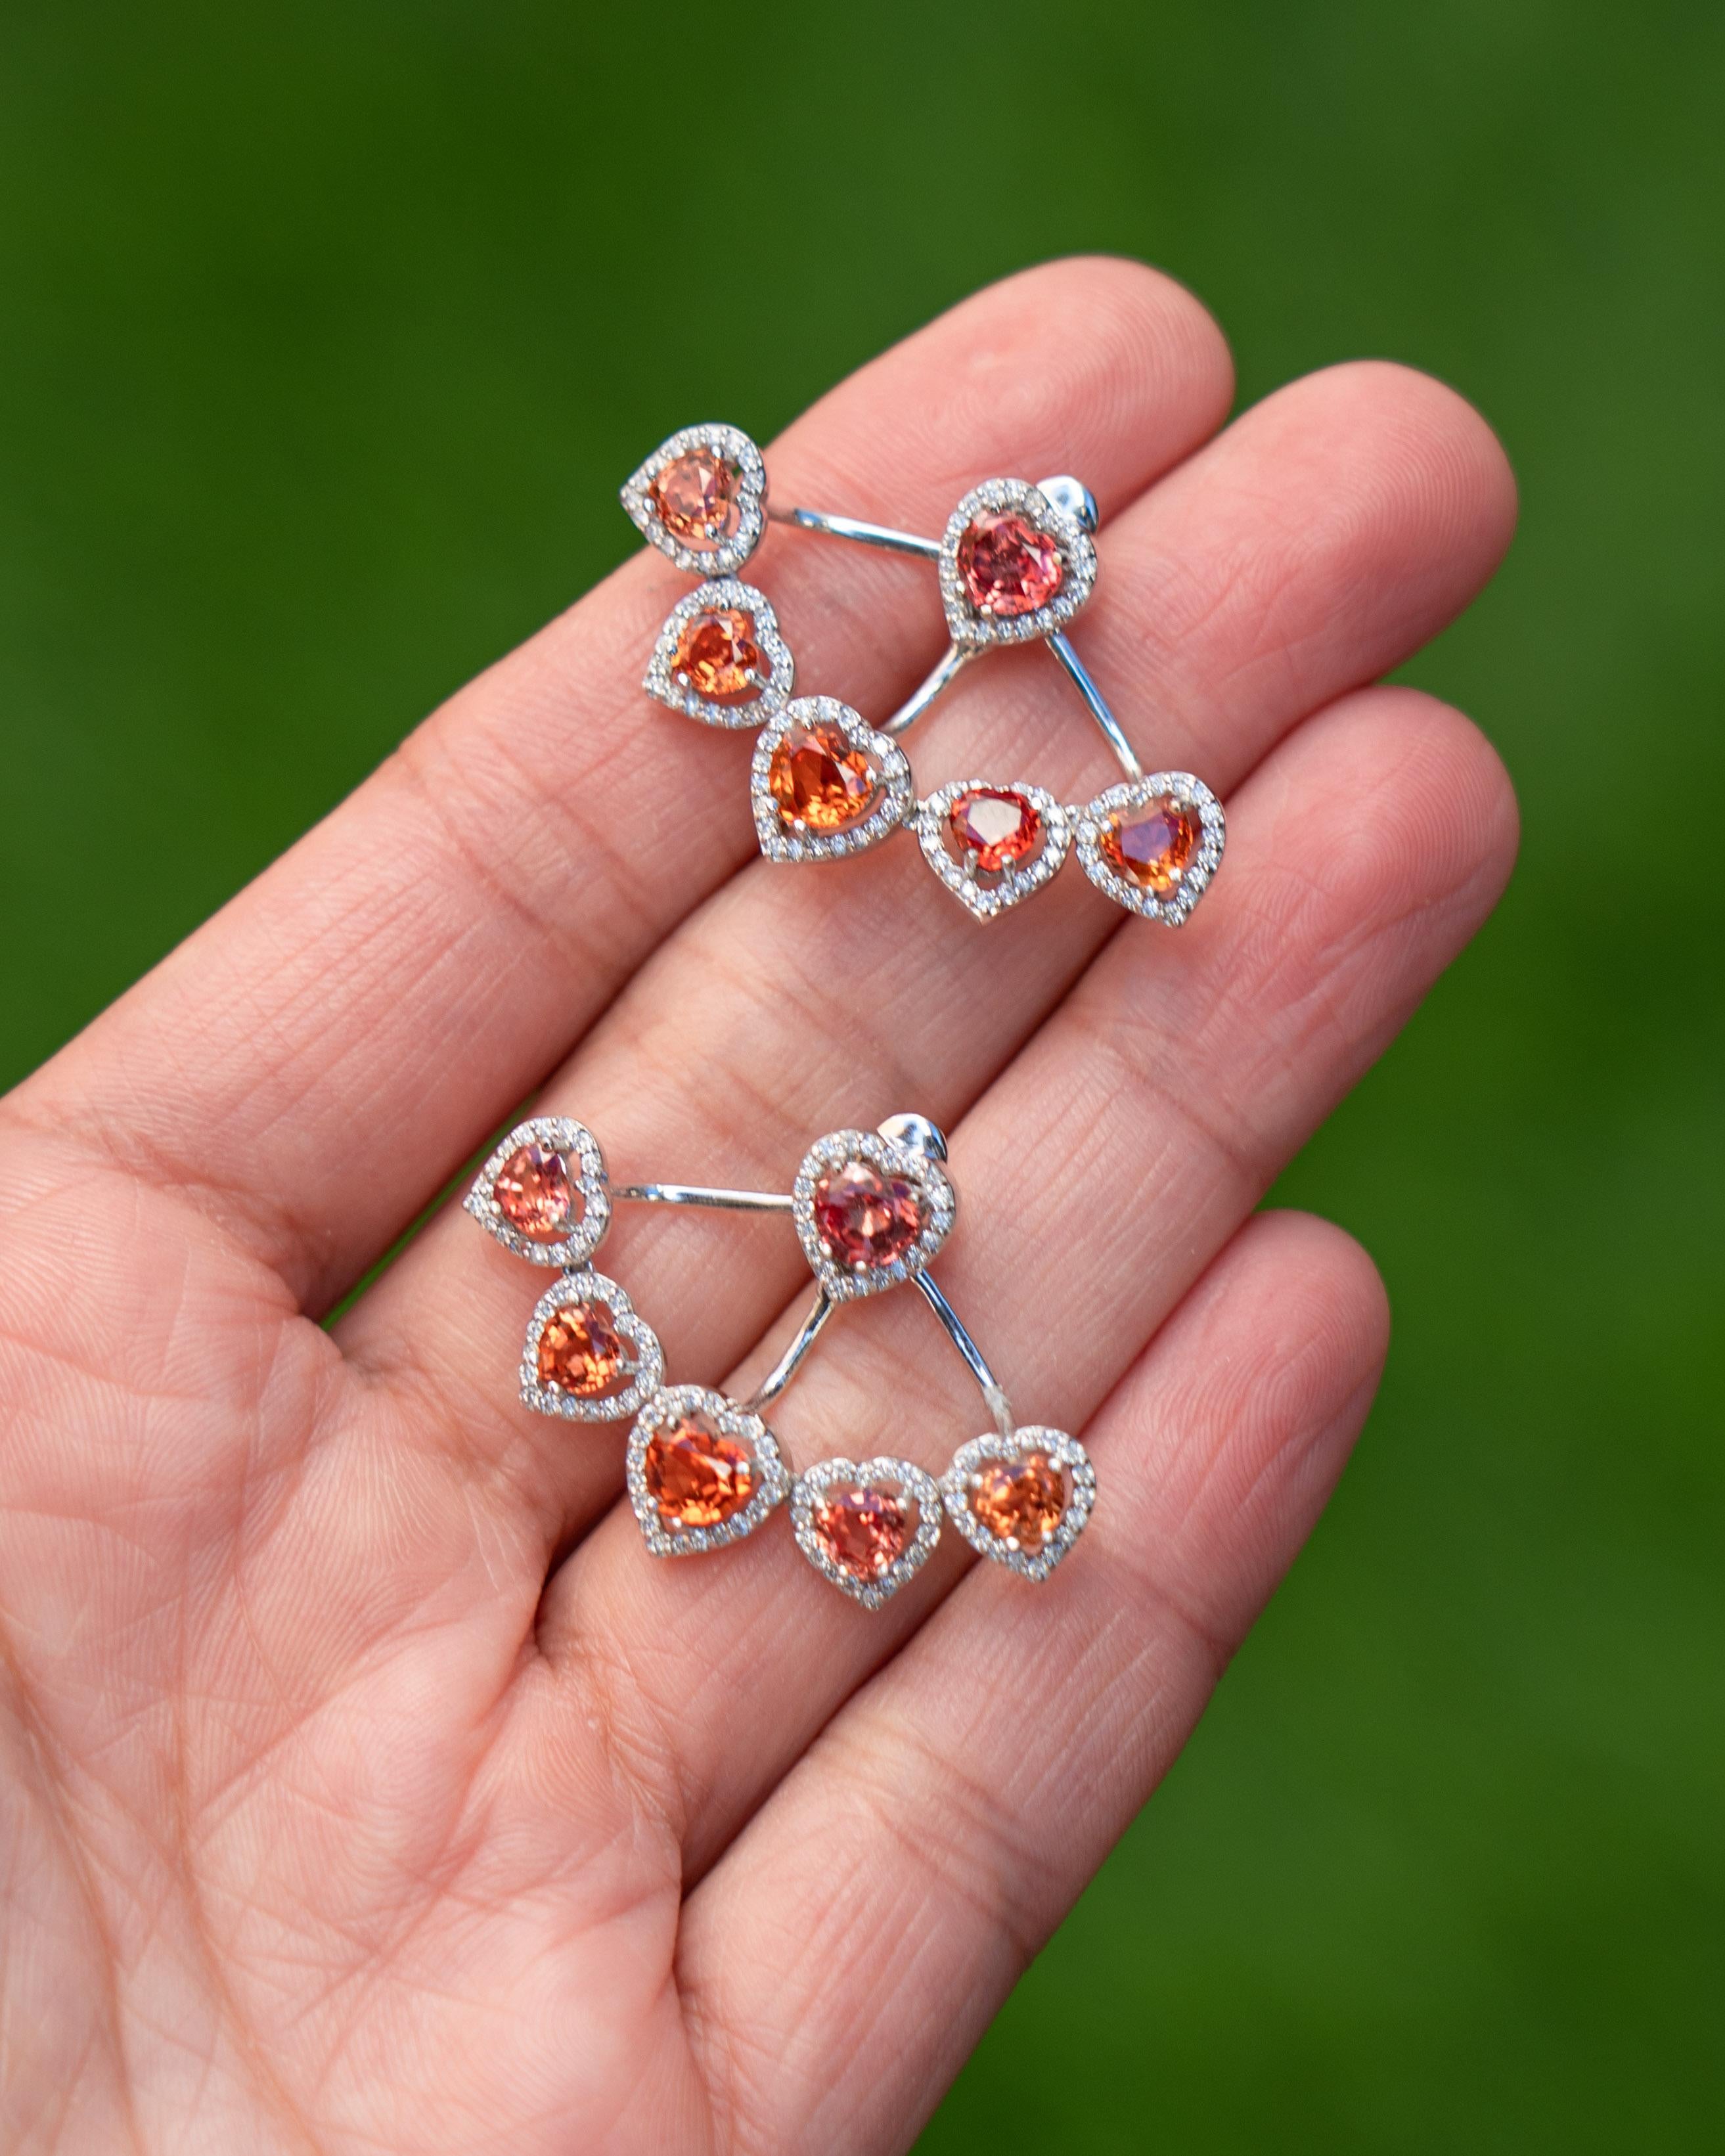 These gorgeous earrings set in orange colored Sapphires can be worn as a single stud and also a more elegant earrings with a 5 piece heart shape orange sapphire extension. The total weight of the sapphires is 5.90 Carats and there are 224 pieces of